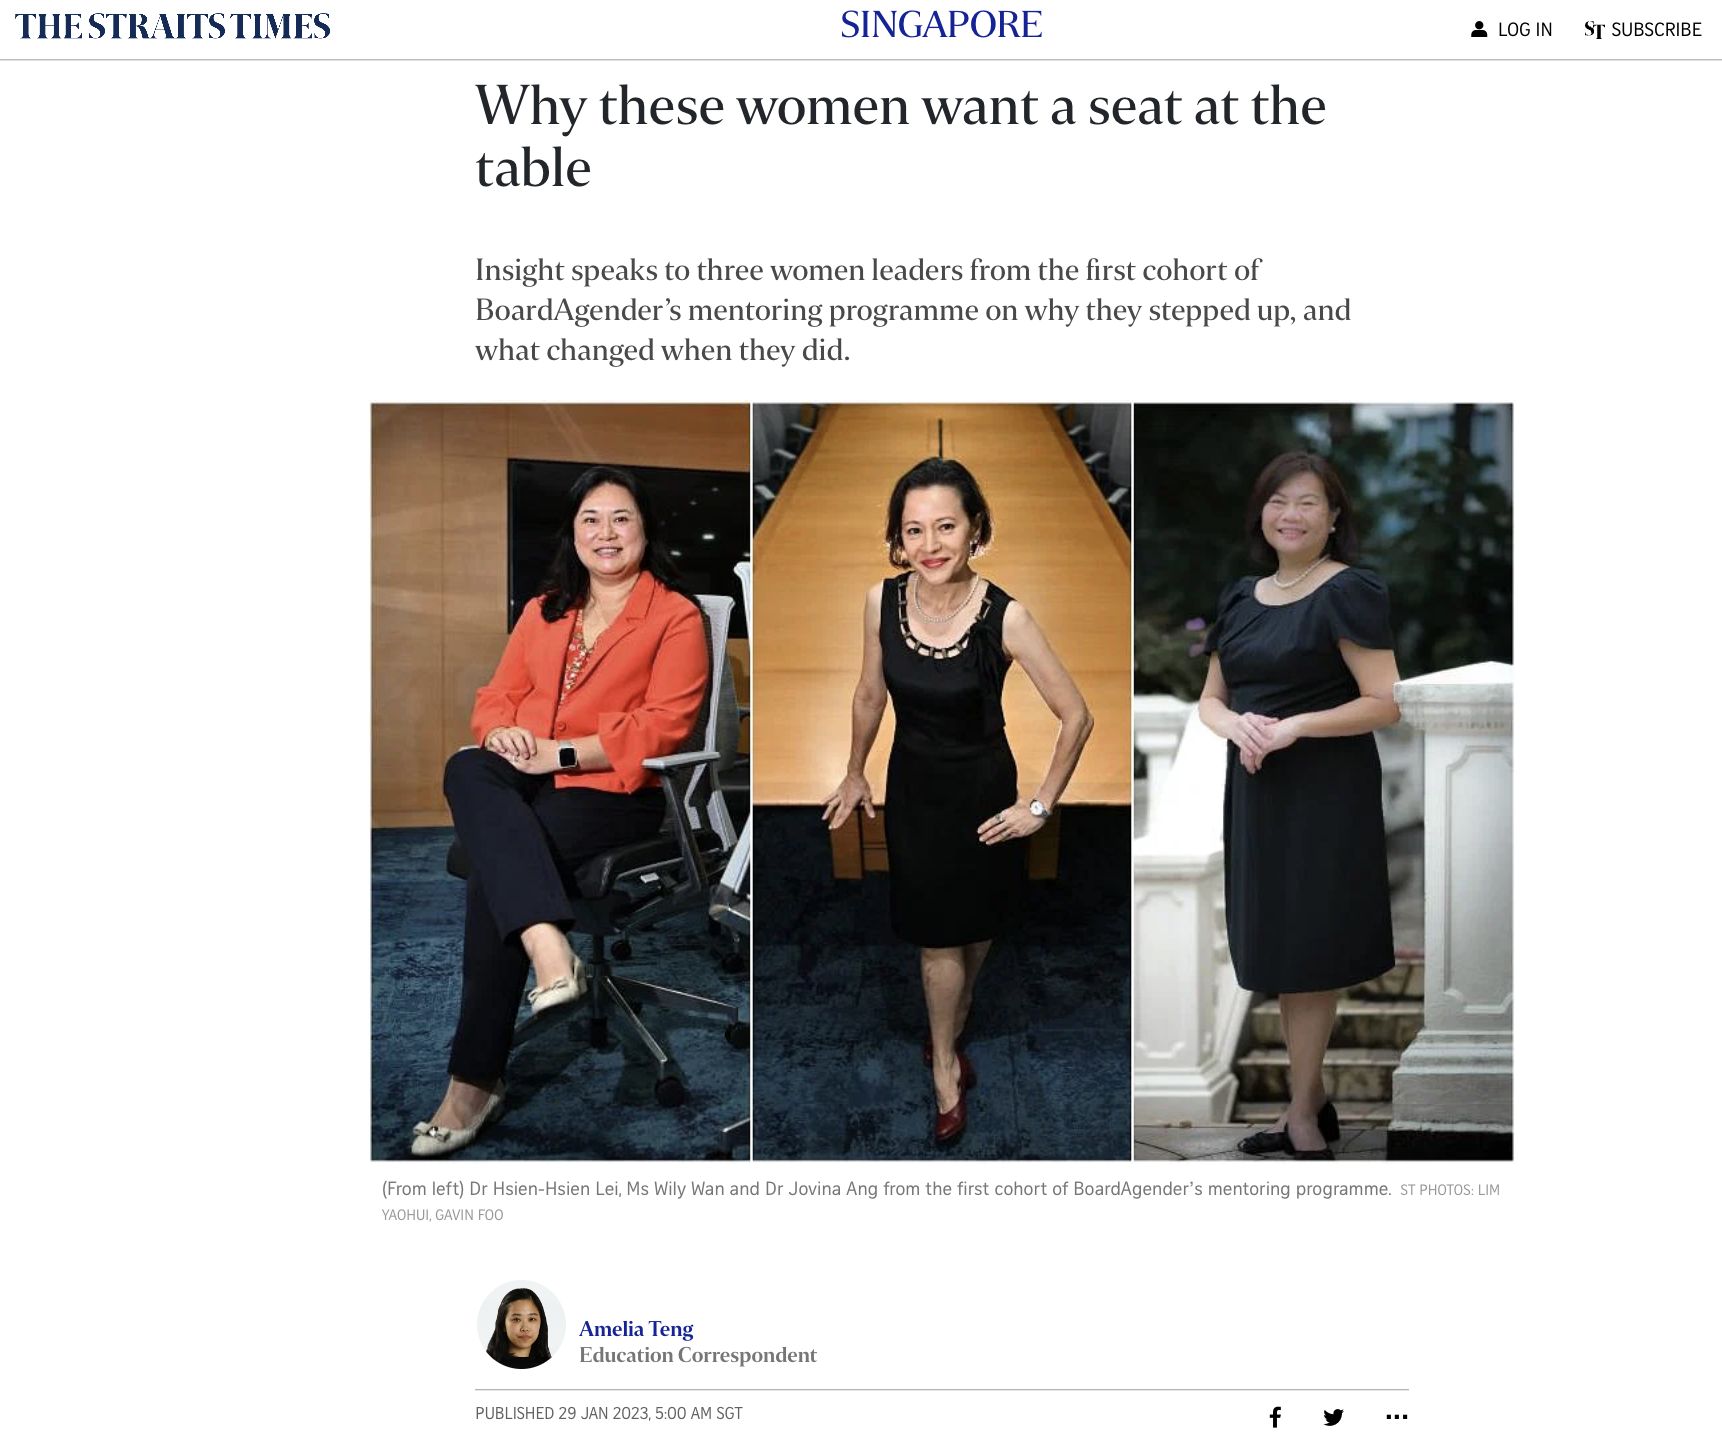 Why these women want a seat at the table